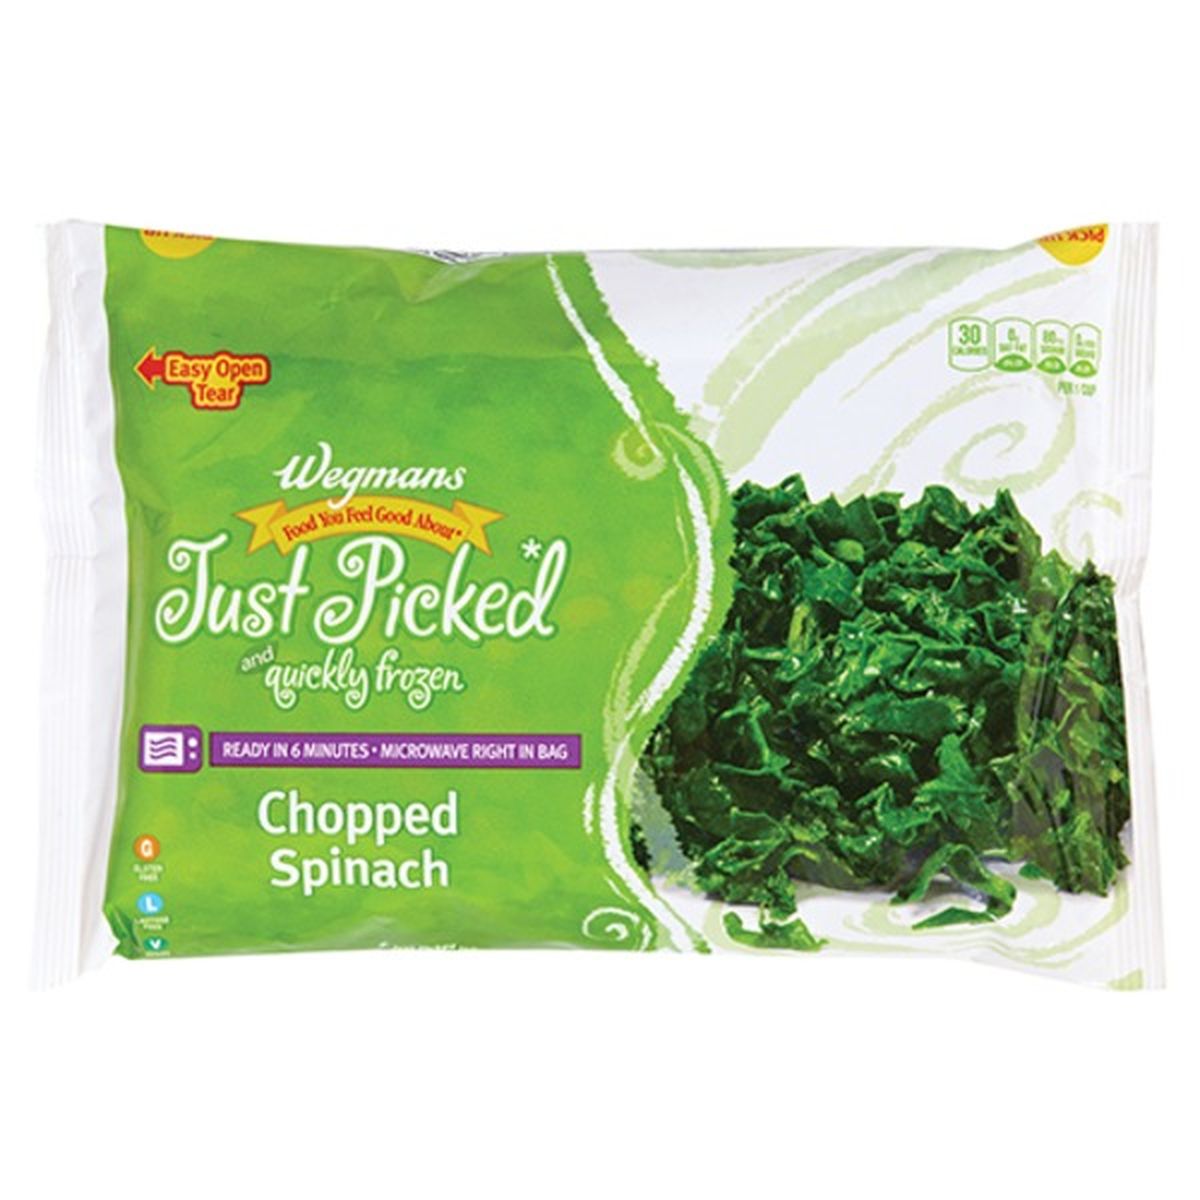 Calories in Wegmans Microwaveable Chopped Spinach